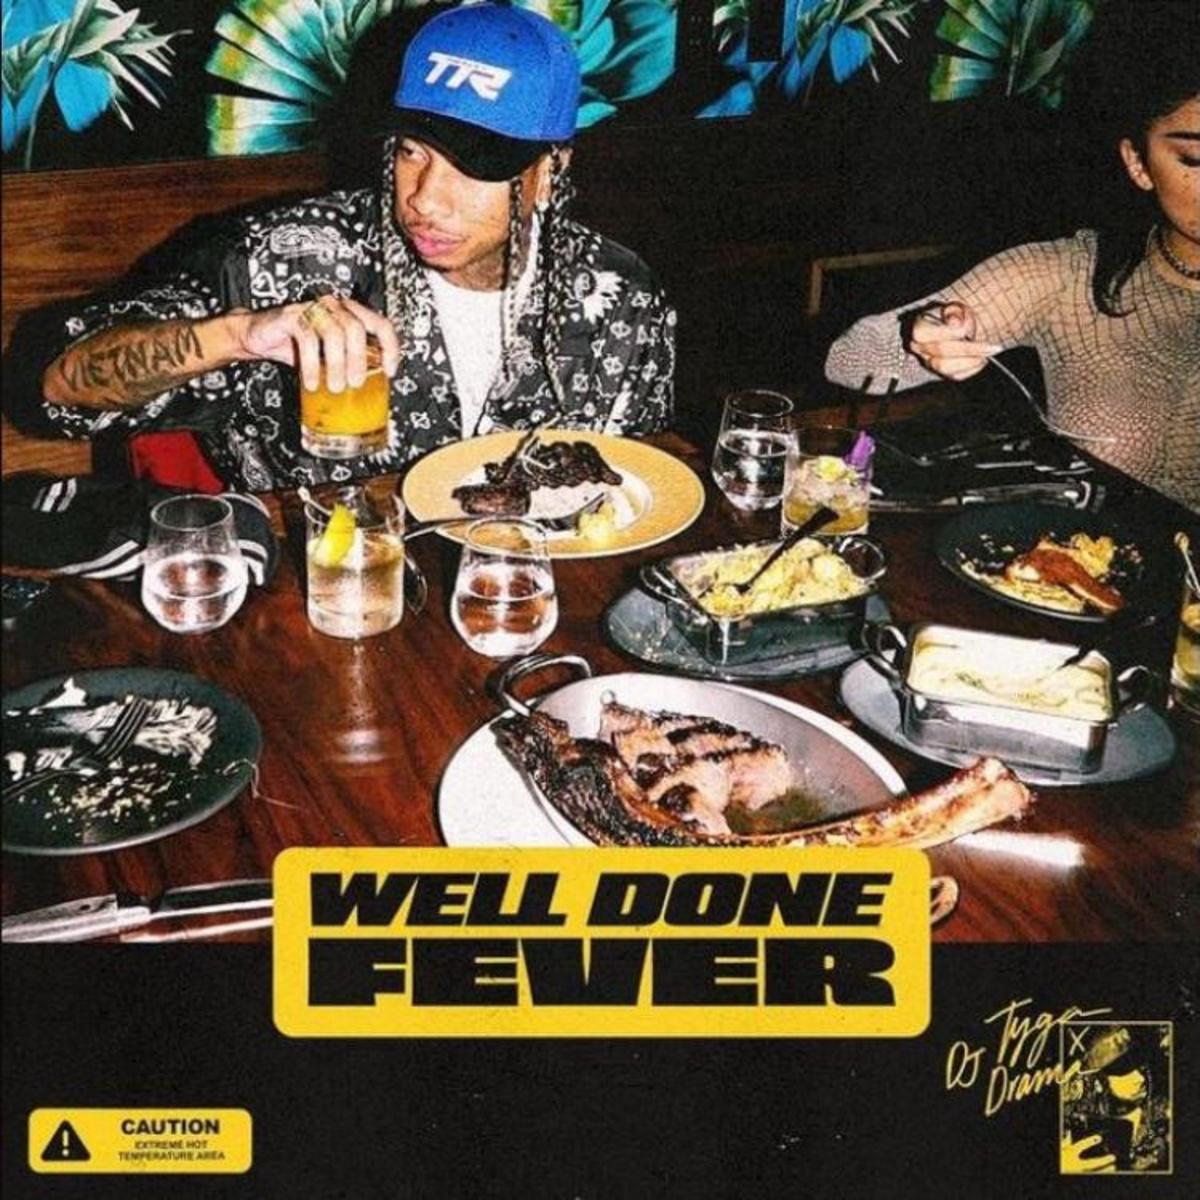 Tyga Ends The Year With “Well Done Fever”